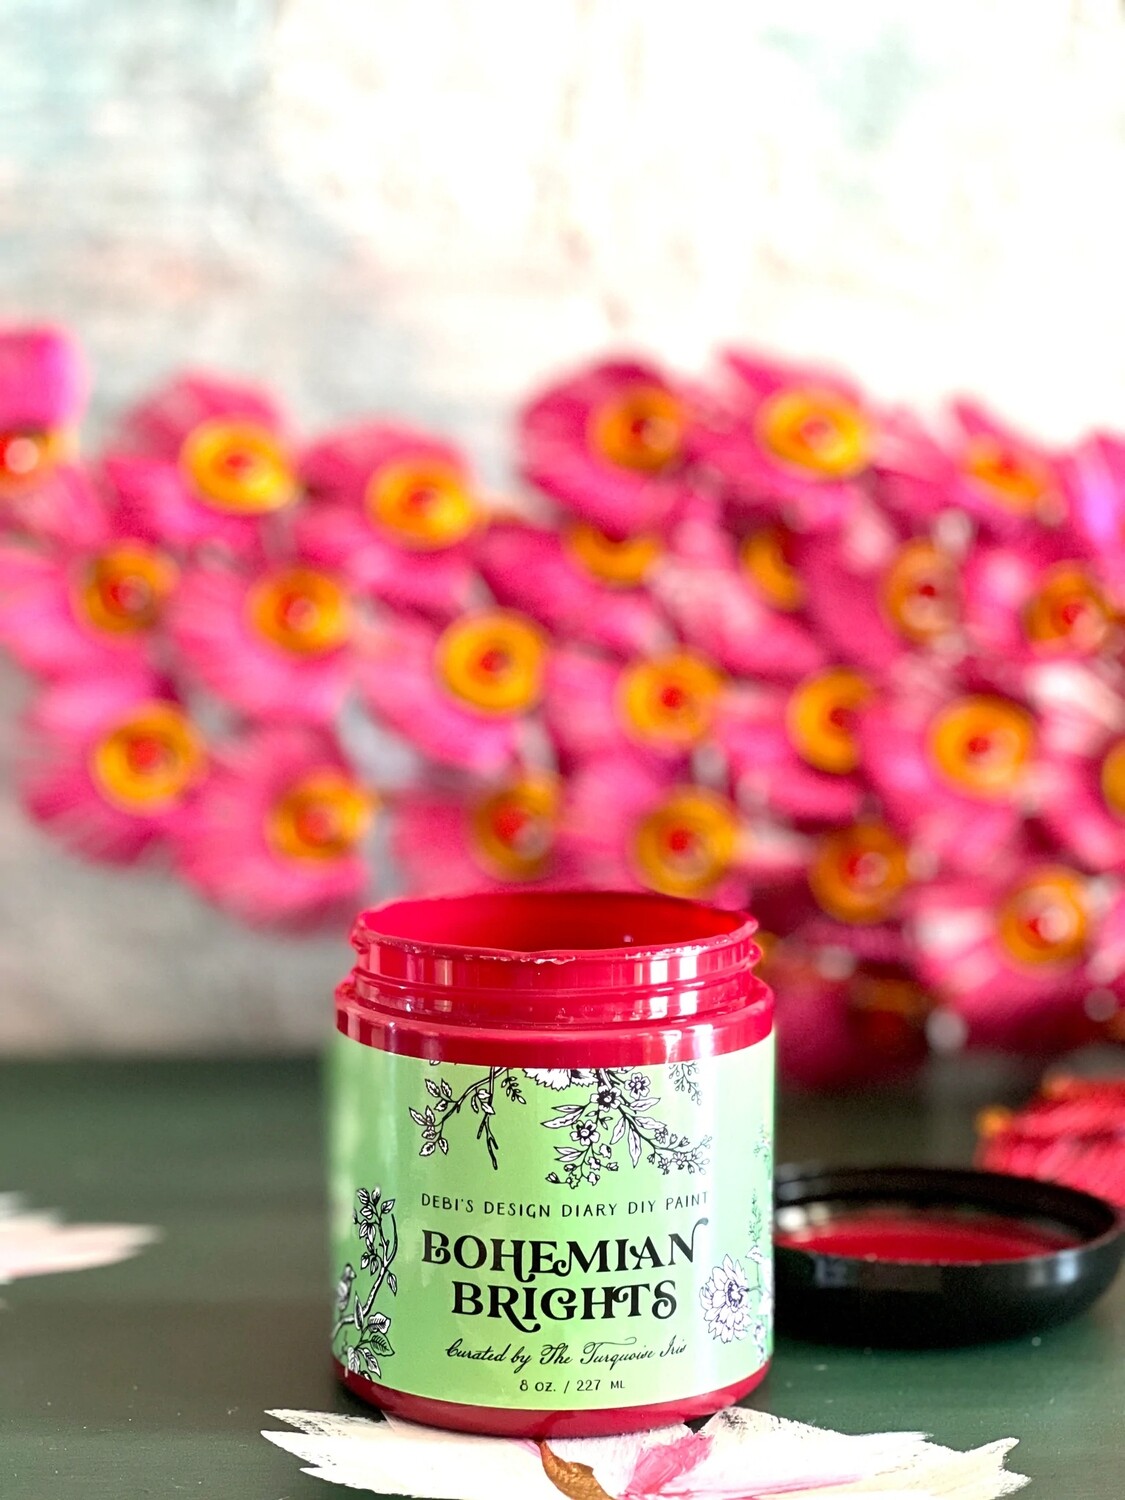 Bohemian Brights Adored Chaos by DIY Paint Co